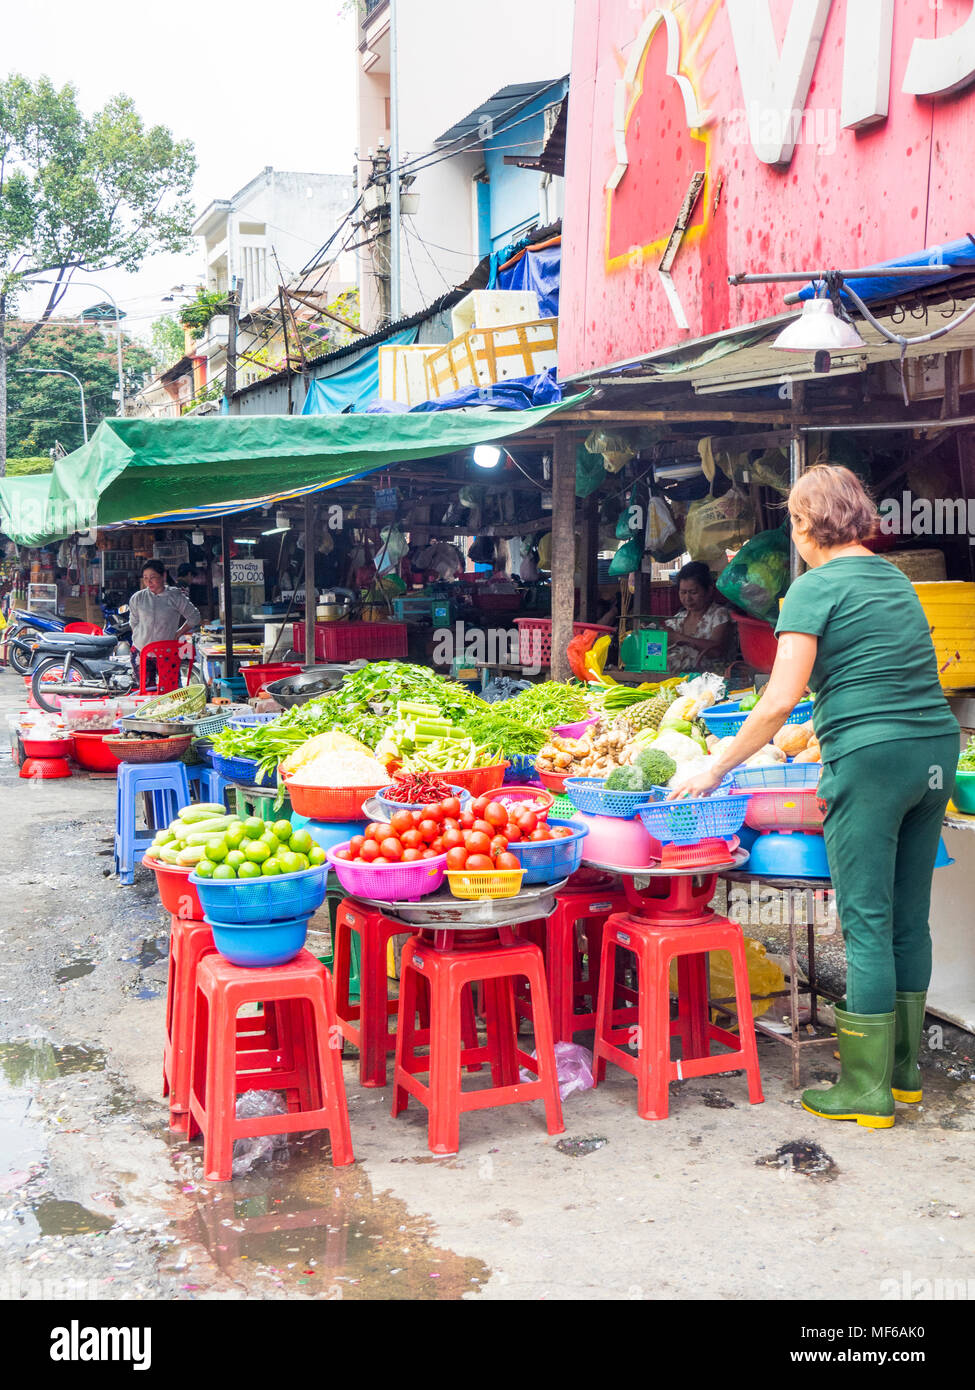 Fruit and vegetable market stalls in the Ton That Dam Street markets, Ho Chi Minh City, Vietnam. Stock Photo